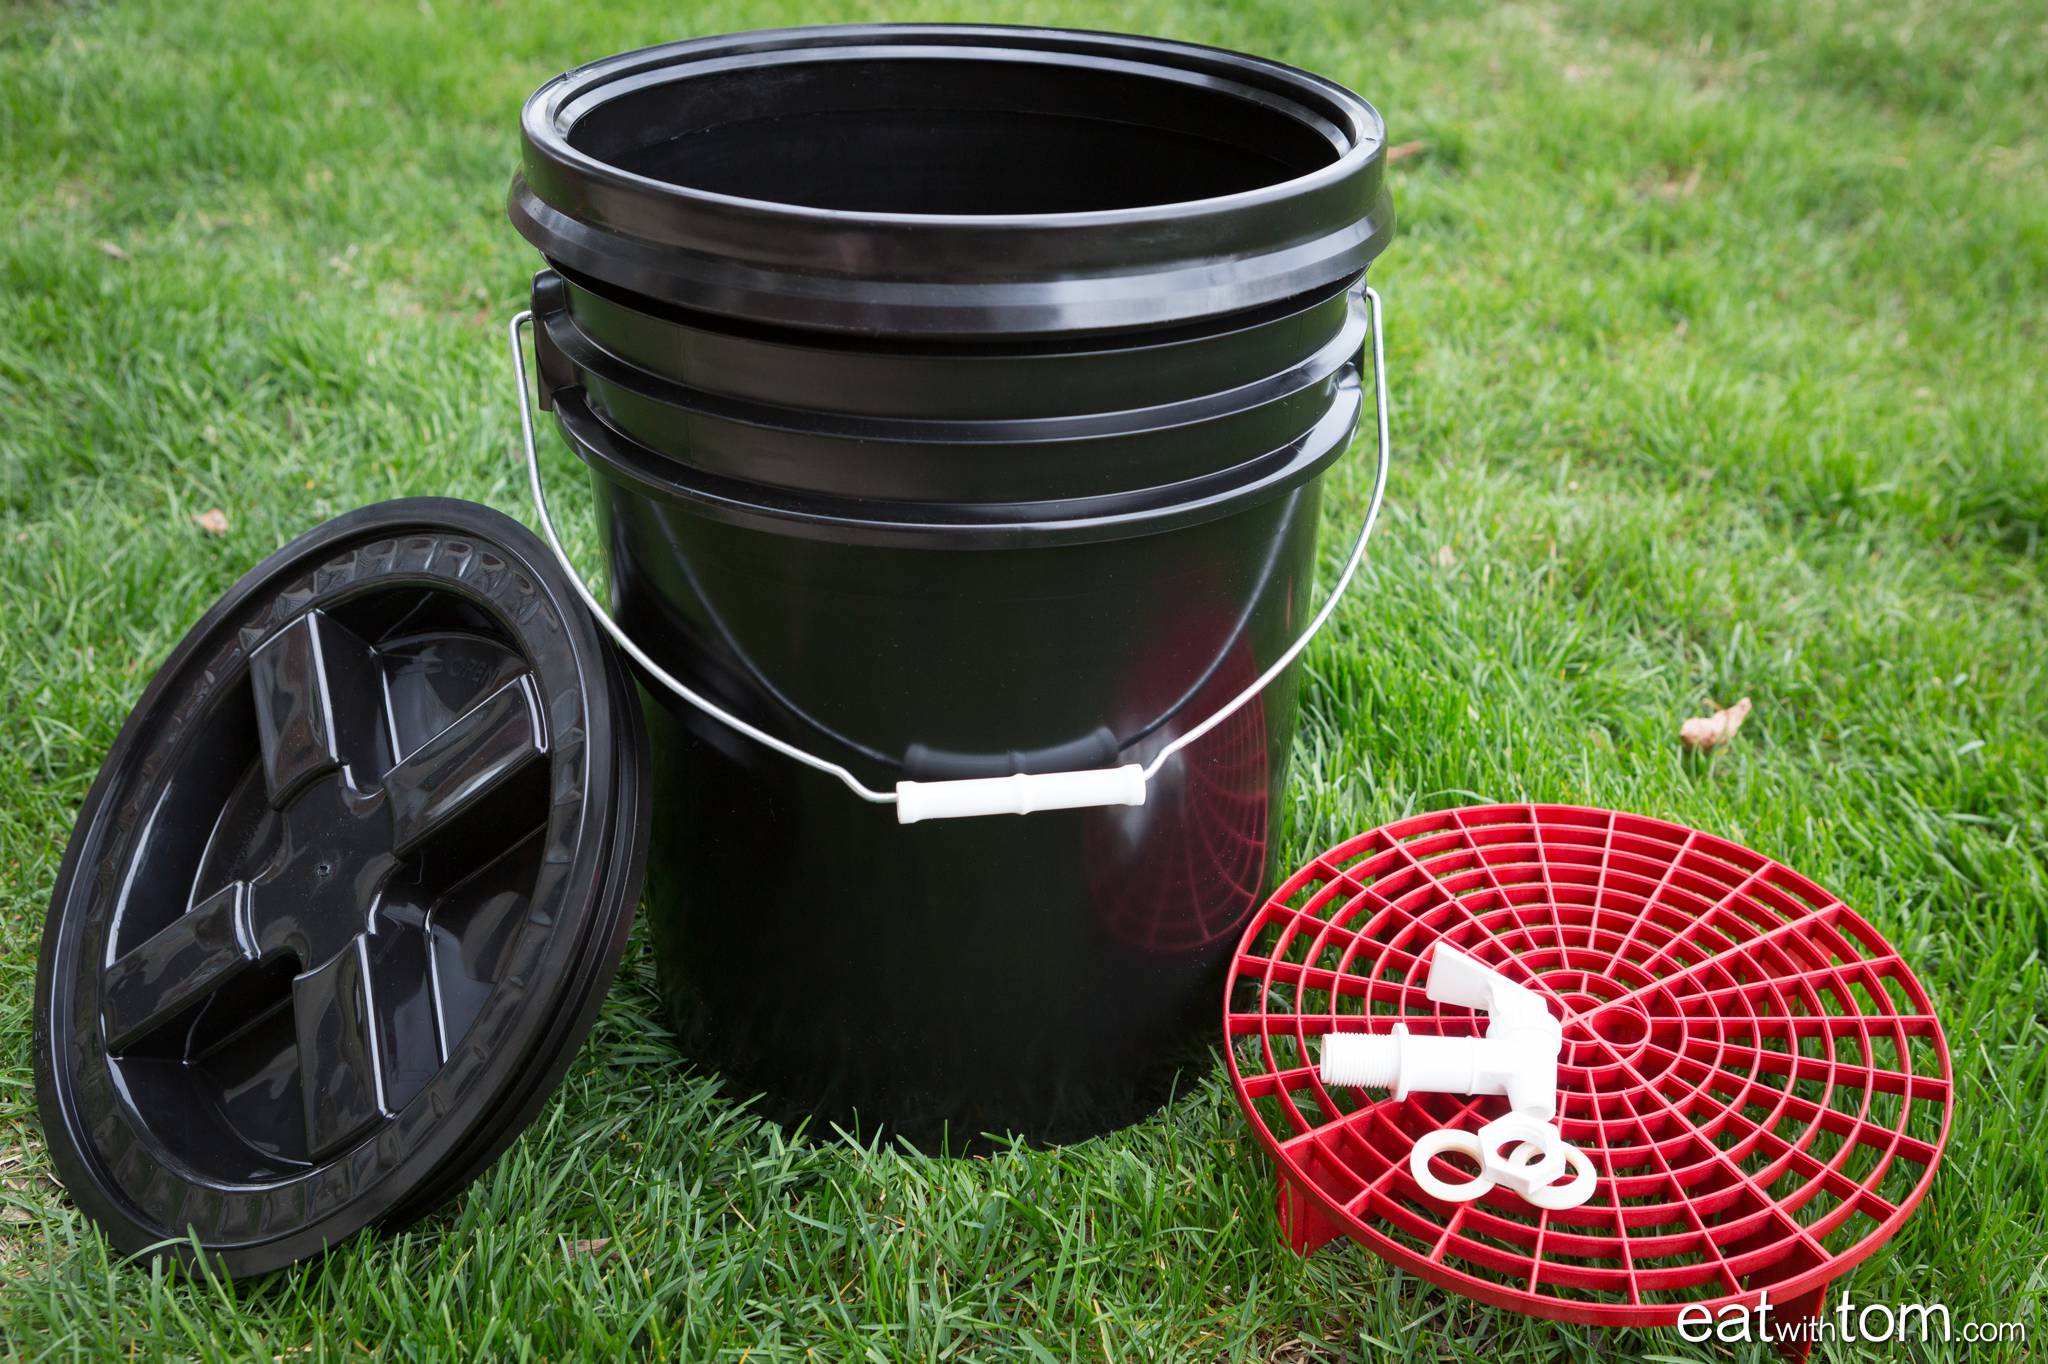 How to make a Bokashi Composter in your suburban home easy!